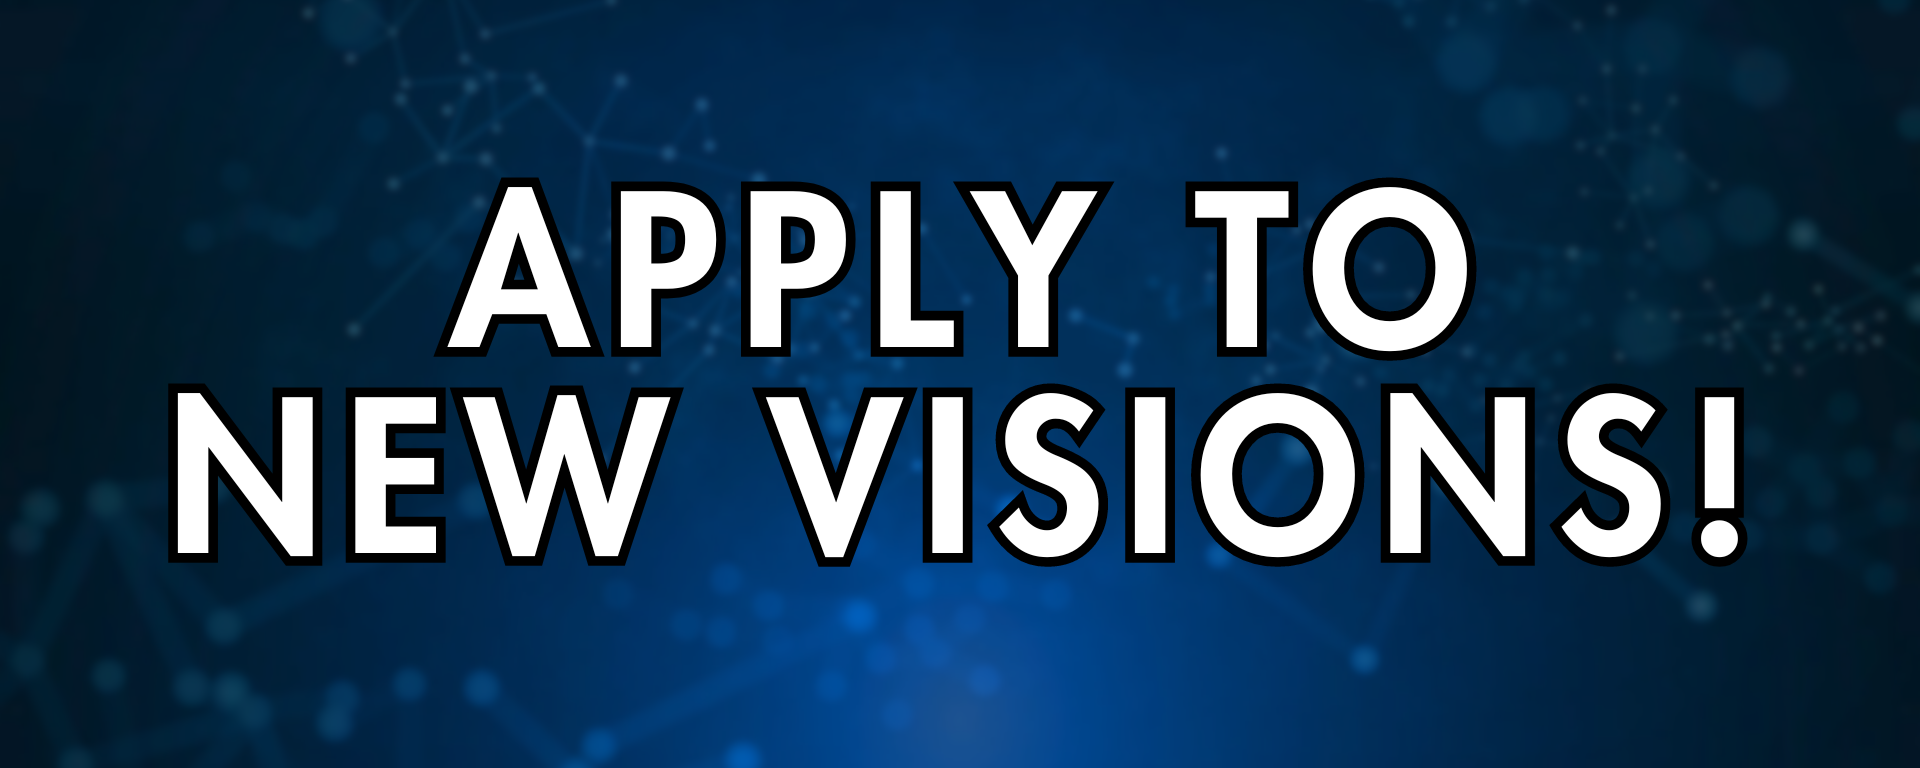 NEW VISIONS APPLY BANNER